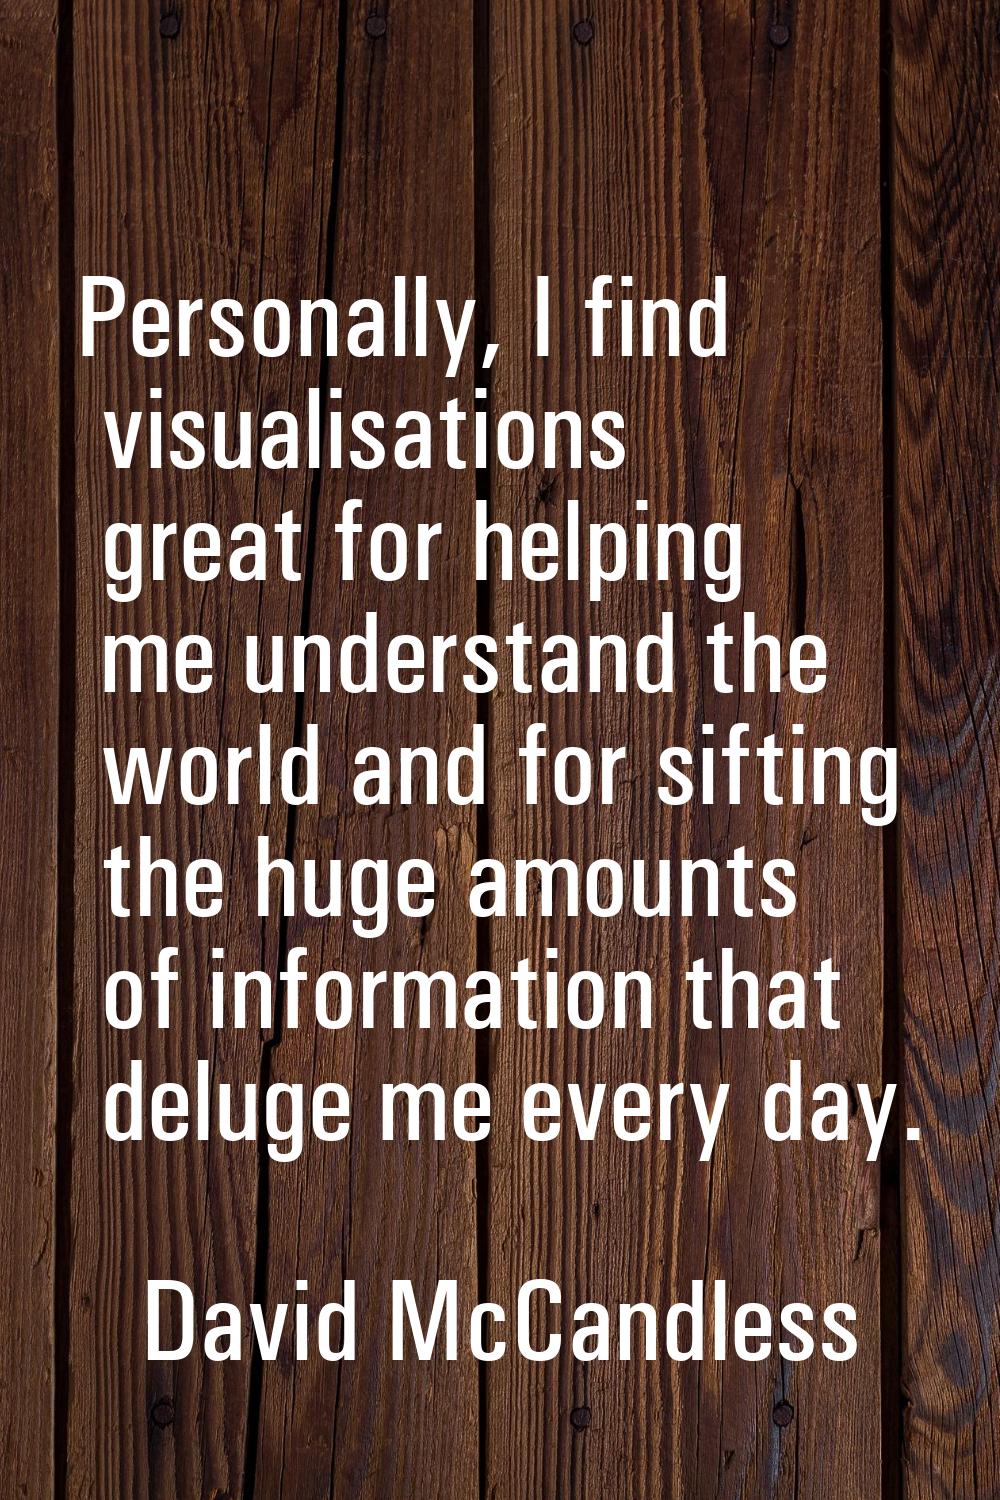 Personally, I find visualisations great for helping me understand the world and for sifting the hug